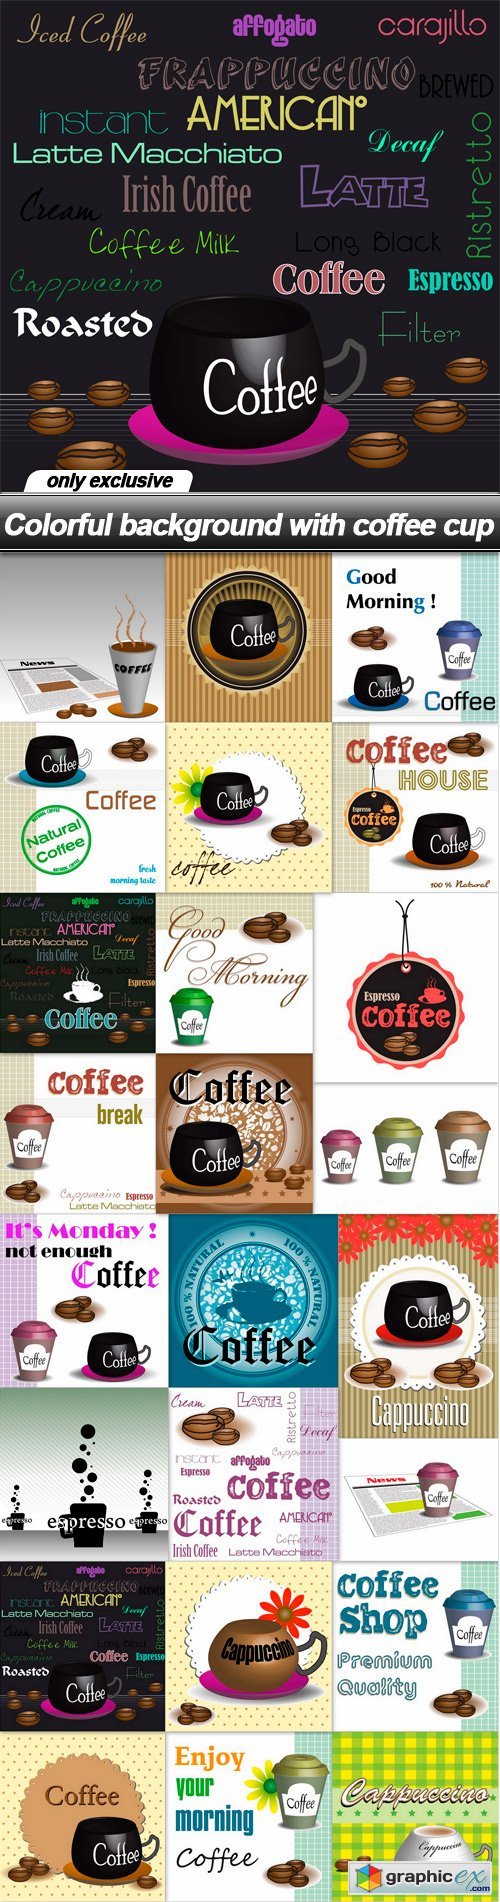 Colorful background with coffee cup - 24 EPS